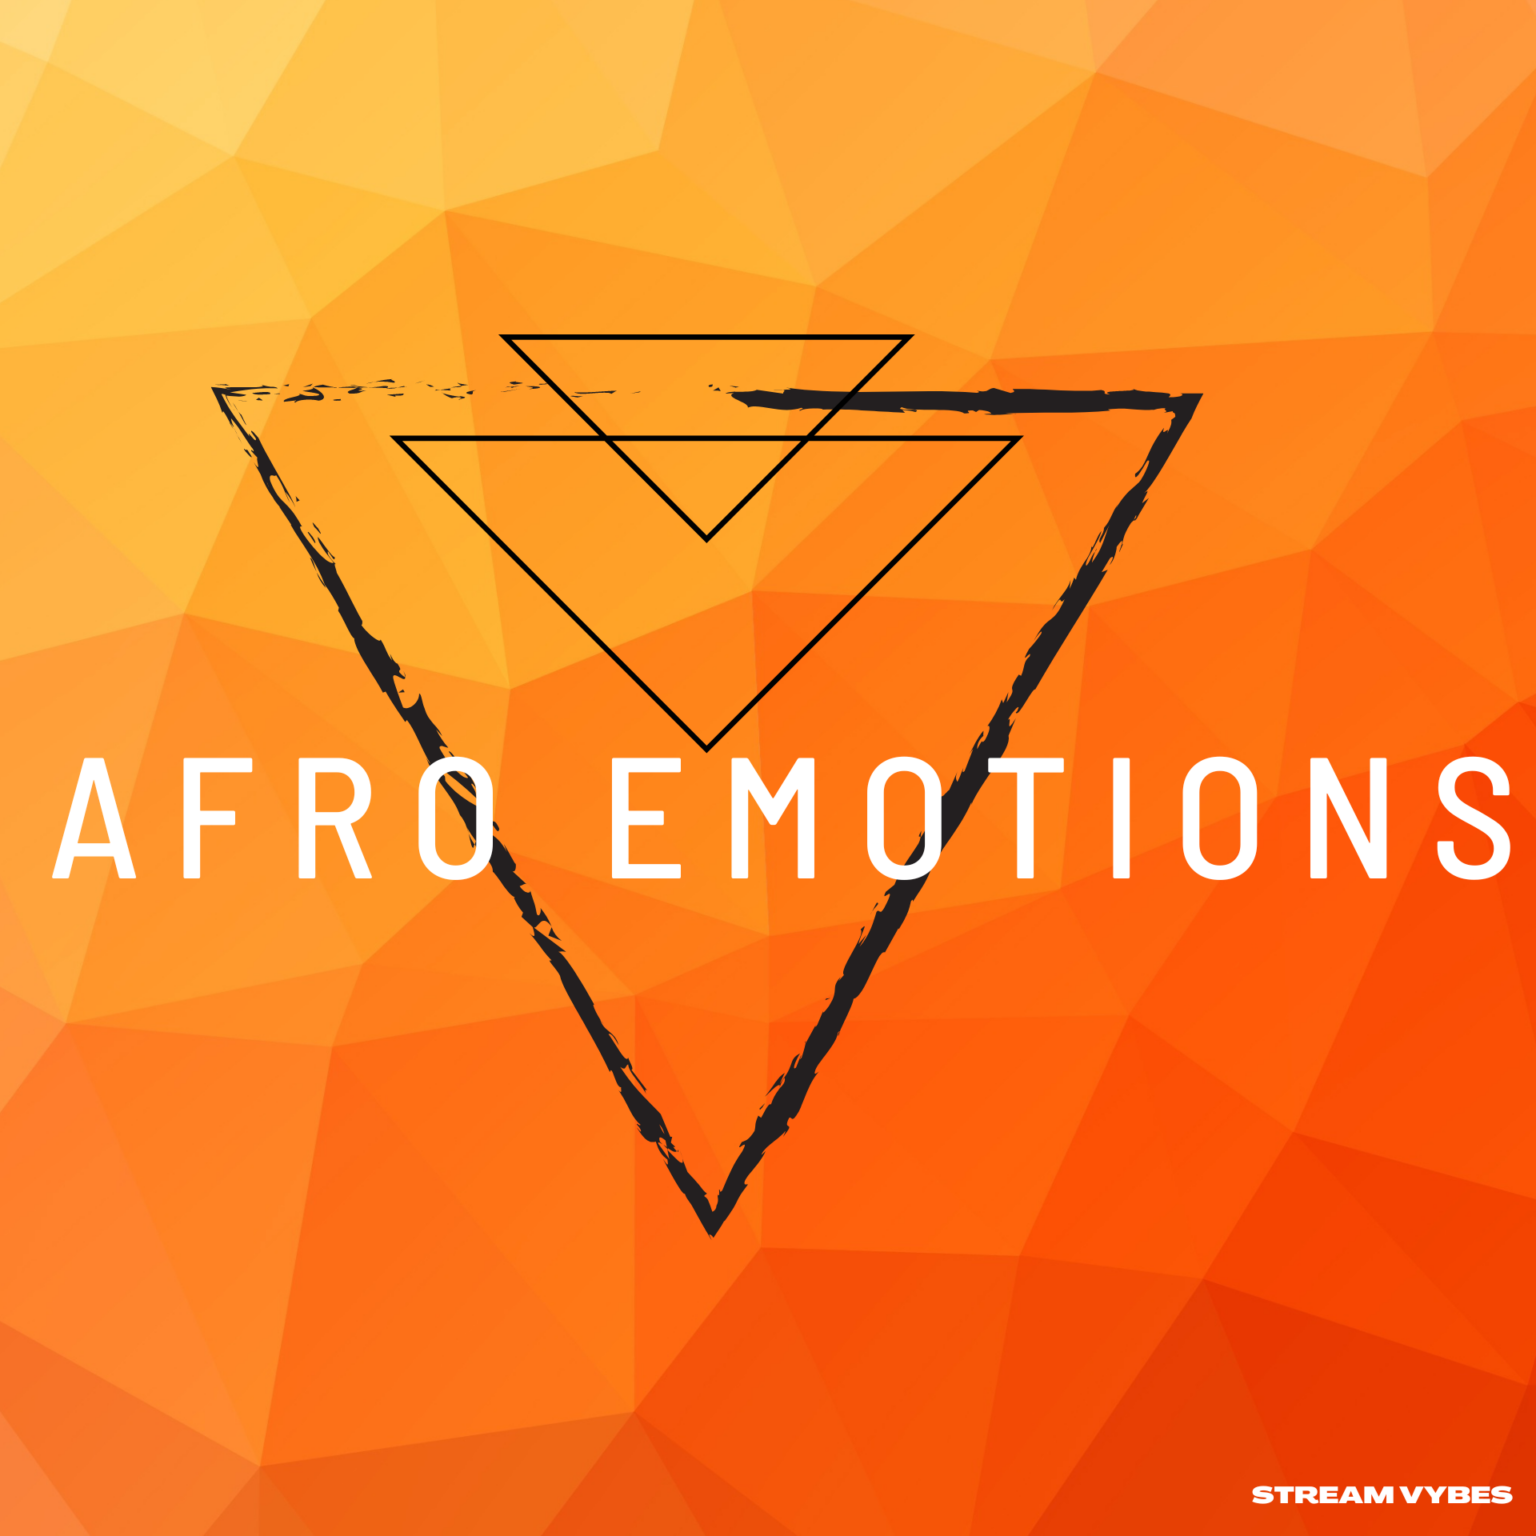 Afro Emotions Playlist Cover For Stream Vybes